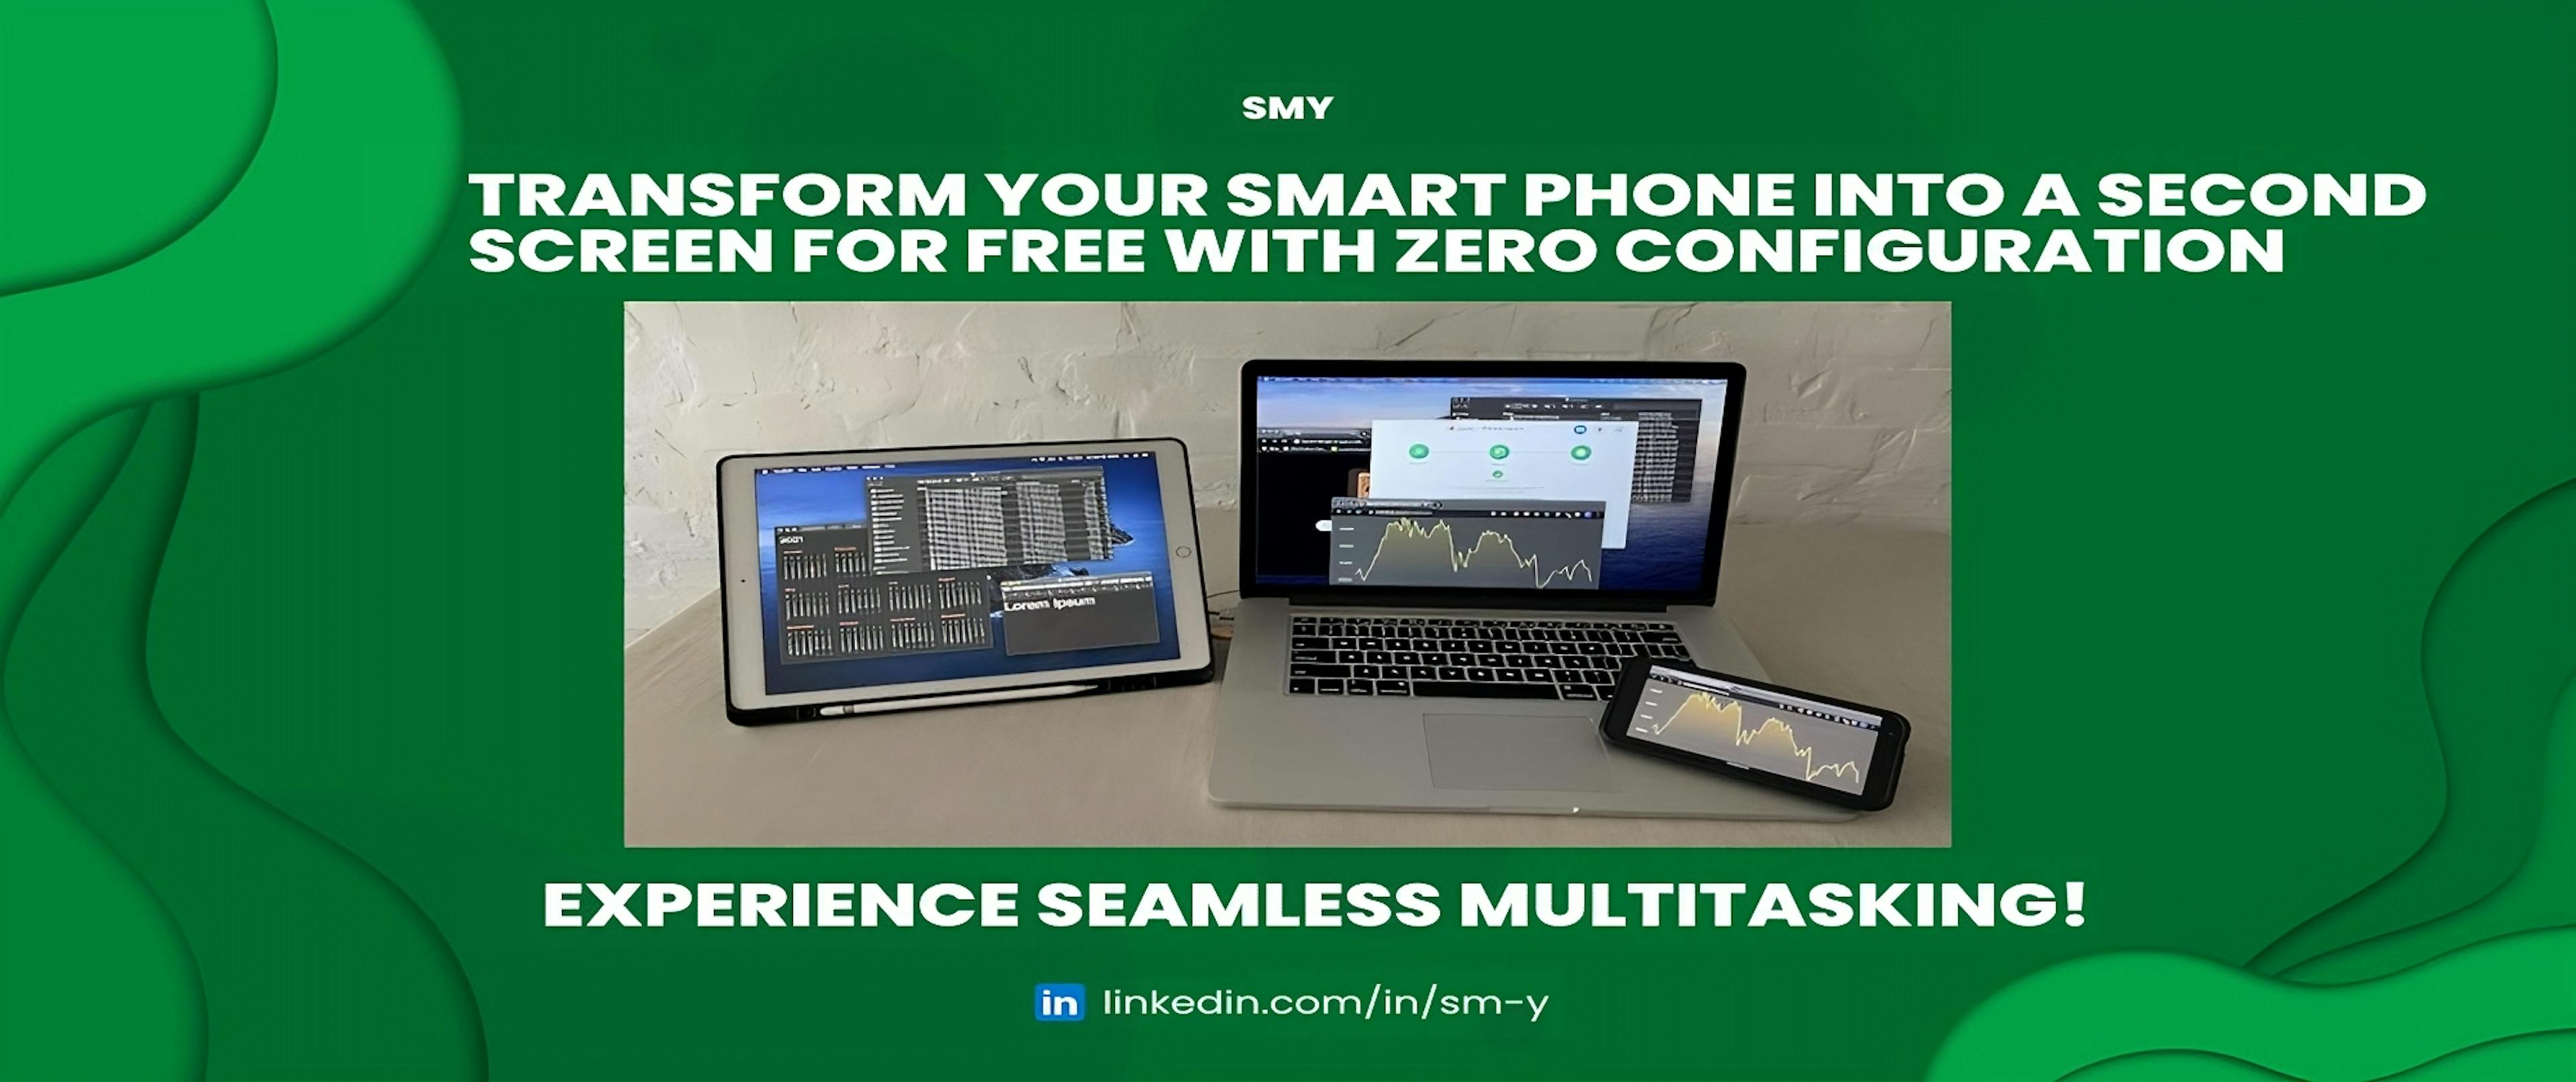 featured image - How Turn Your Smartphone Into a Second Screen for FREE For Seamless Multitasking!